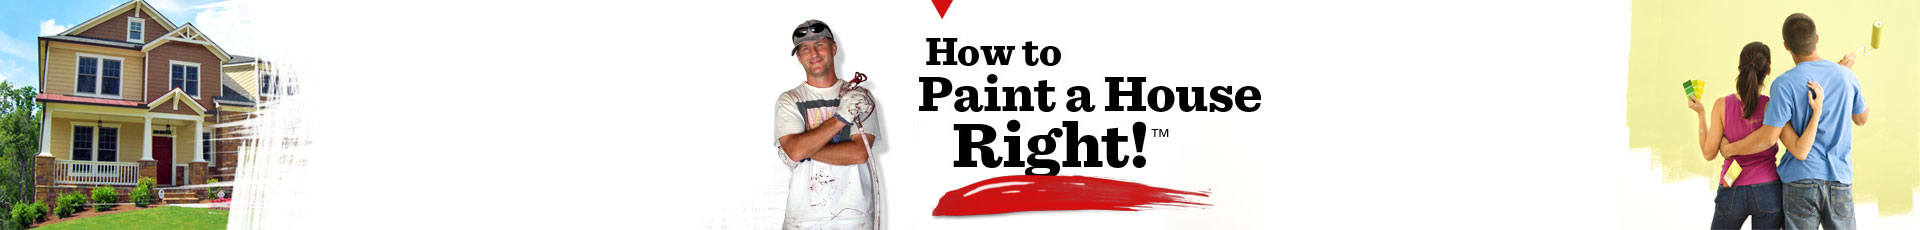 How to Paint a House Right! - 